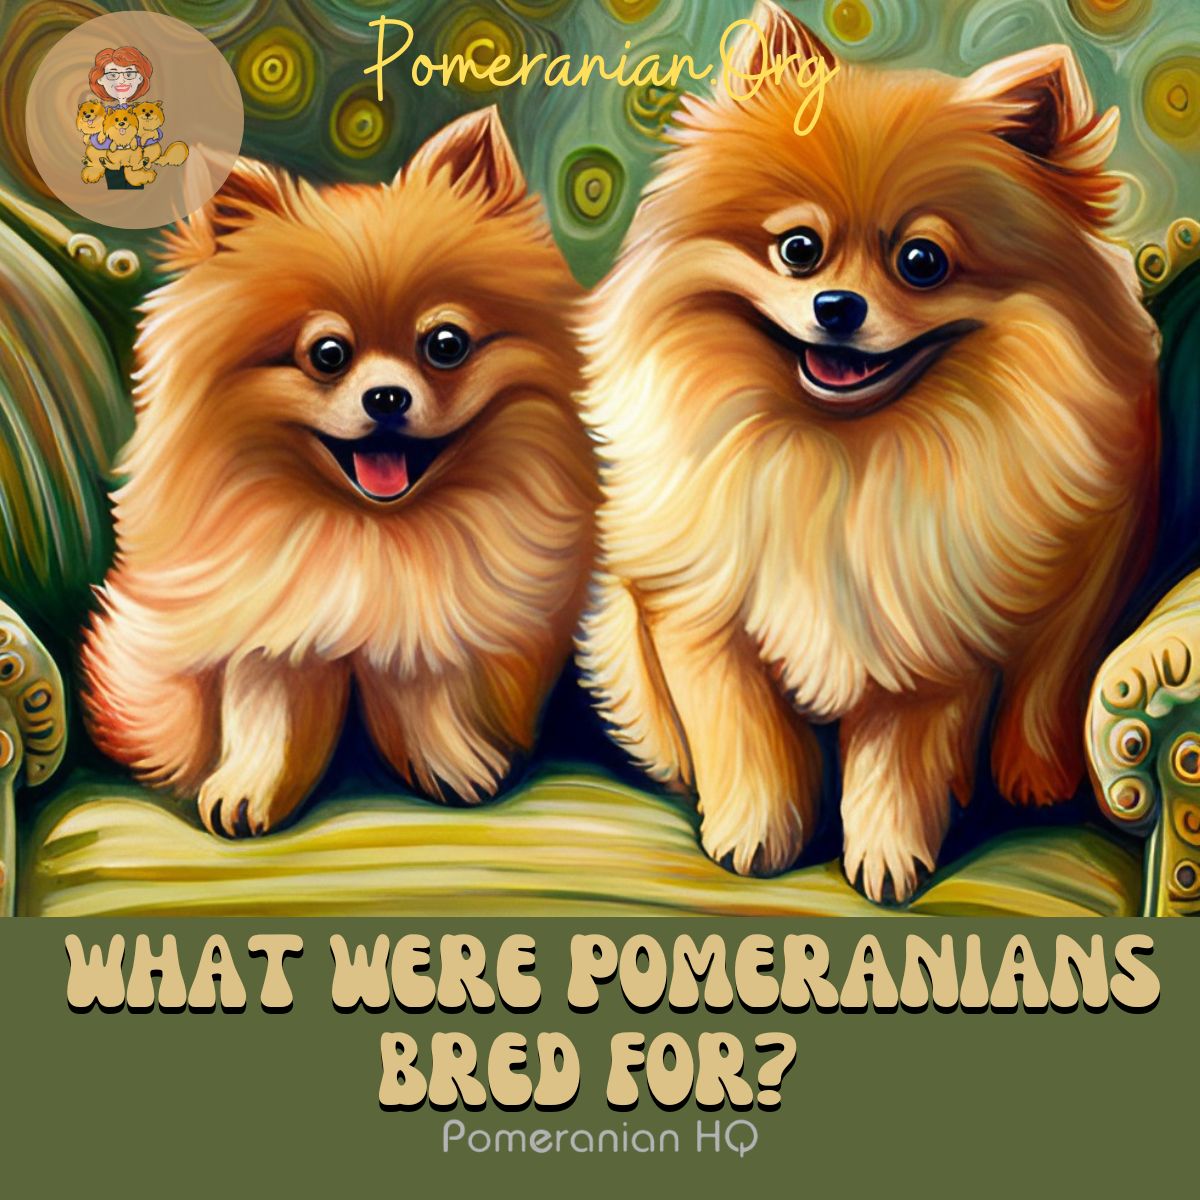 What Were Pomeranians Bred For?